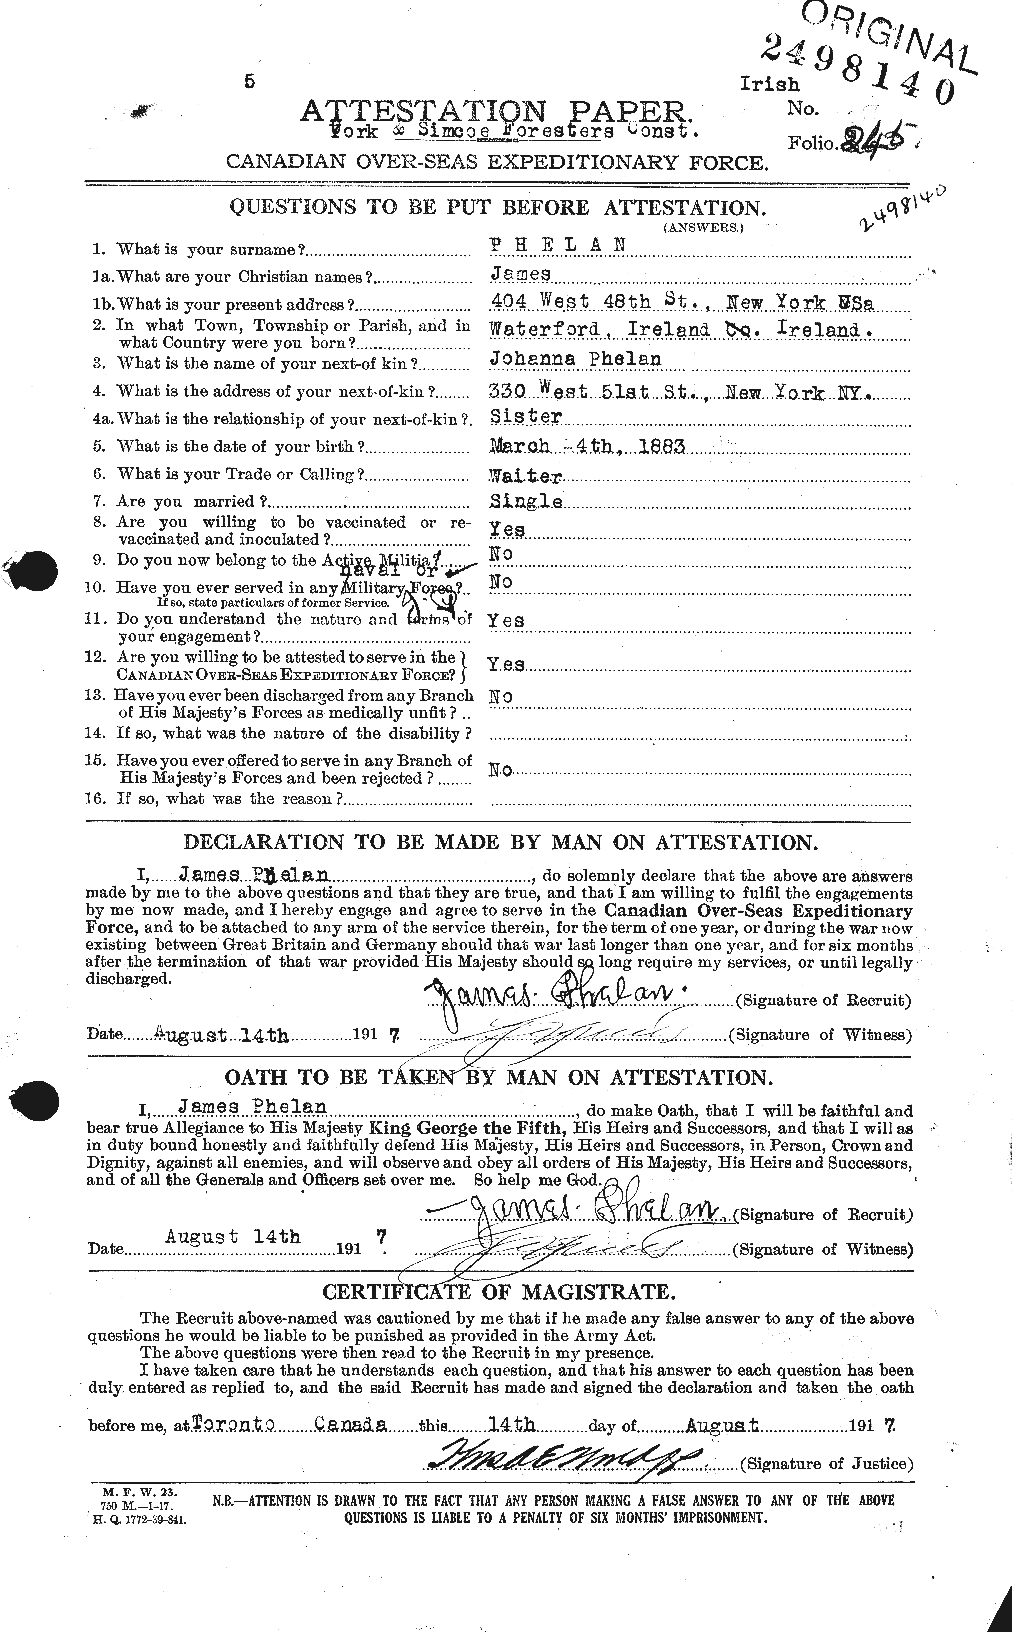 Personnel Records of the First World War - CEF 576951a